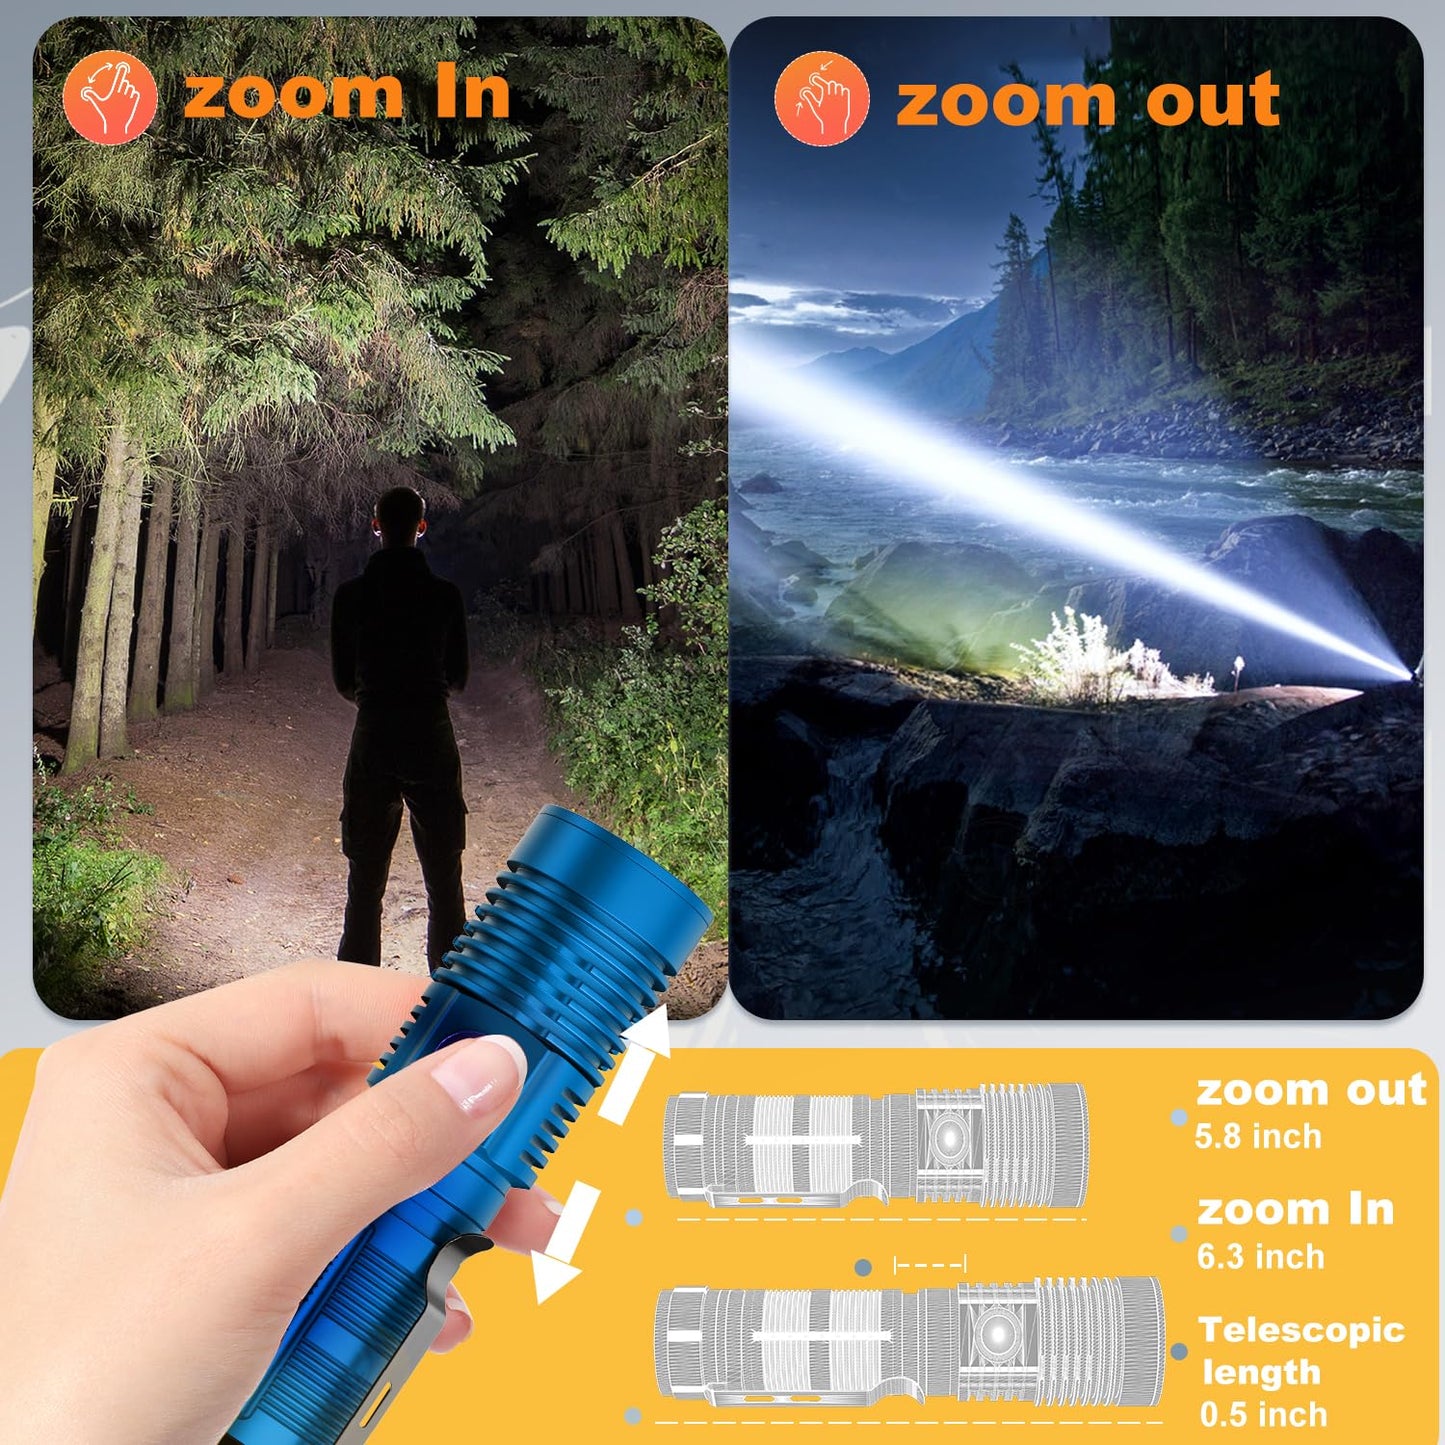 Small Tactical Flashlights 20000 High Lumens - 1500 Meters Long Beam Super Bright LED Magnetic Flashlight USB Rechargeable Zoomable 5Modes Long Beam Spotlight Flashlight for Hiking, Camping-Blue